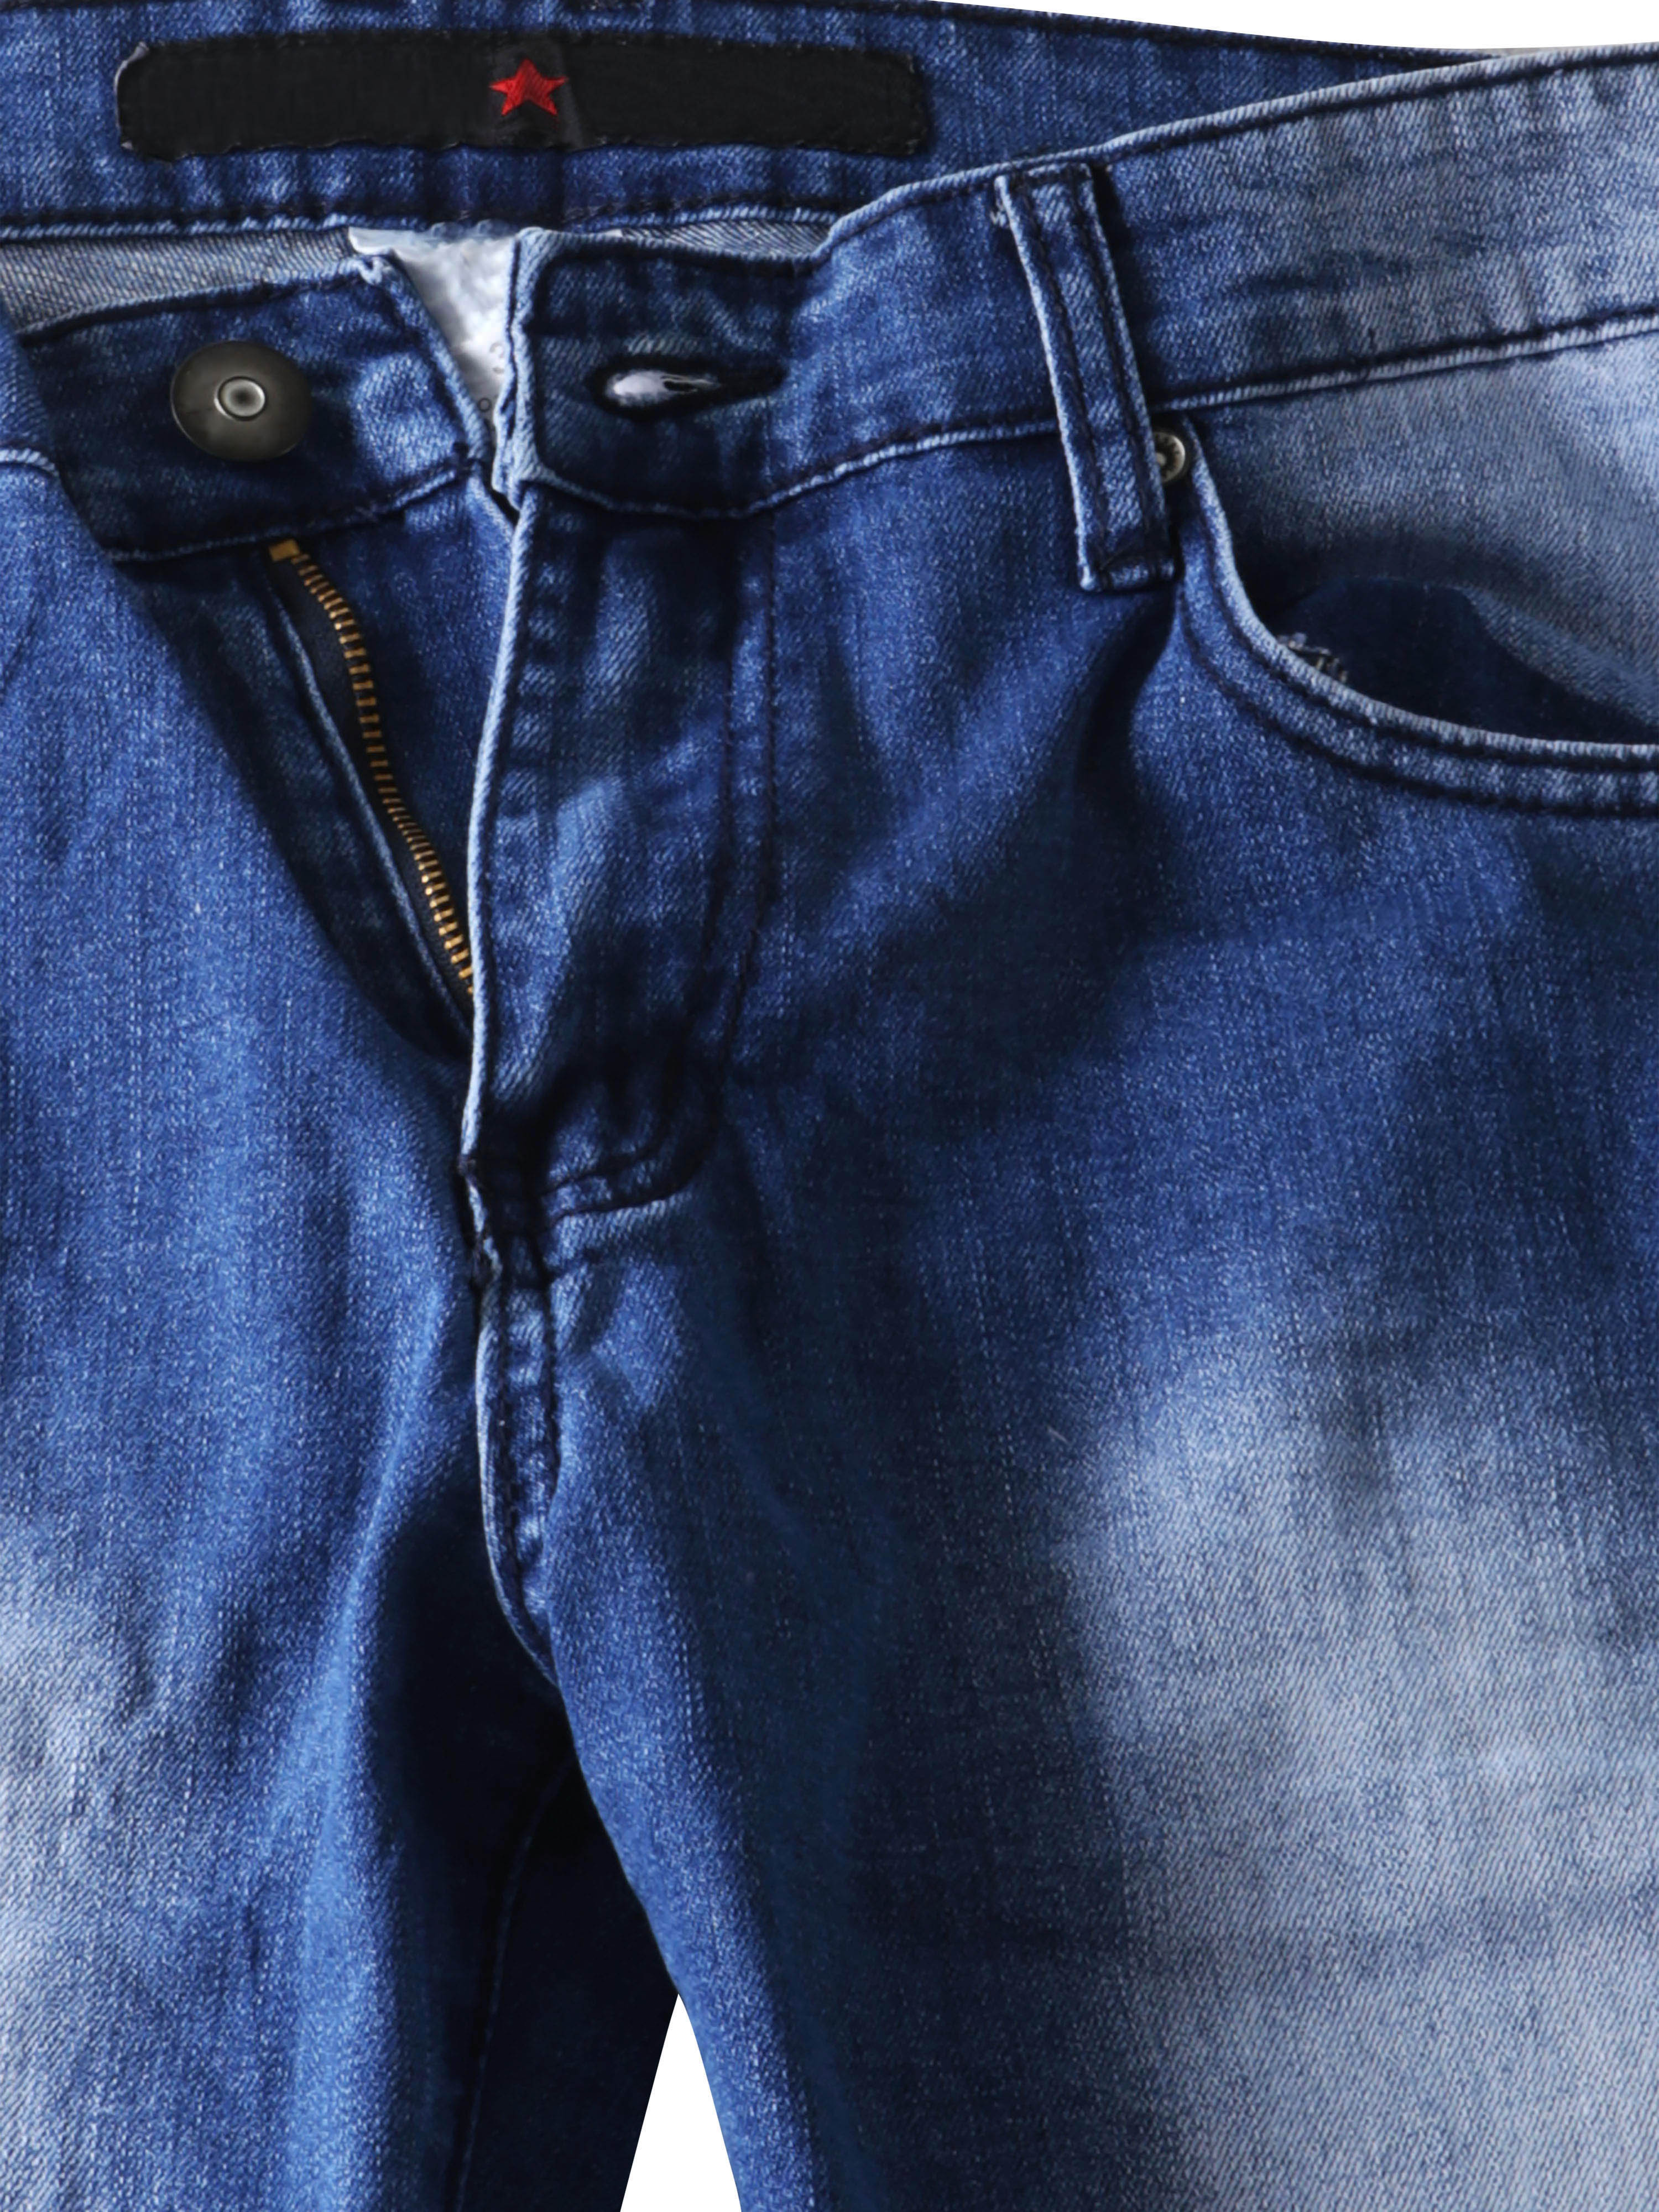 Ma Croix Mens Distressed Skinny Fit Denim Jeans with Zipper Pocket - image 3 of 6